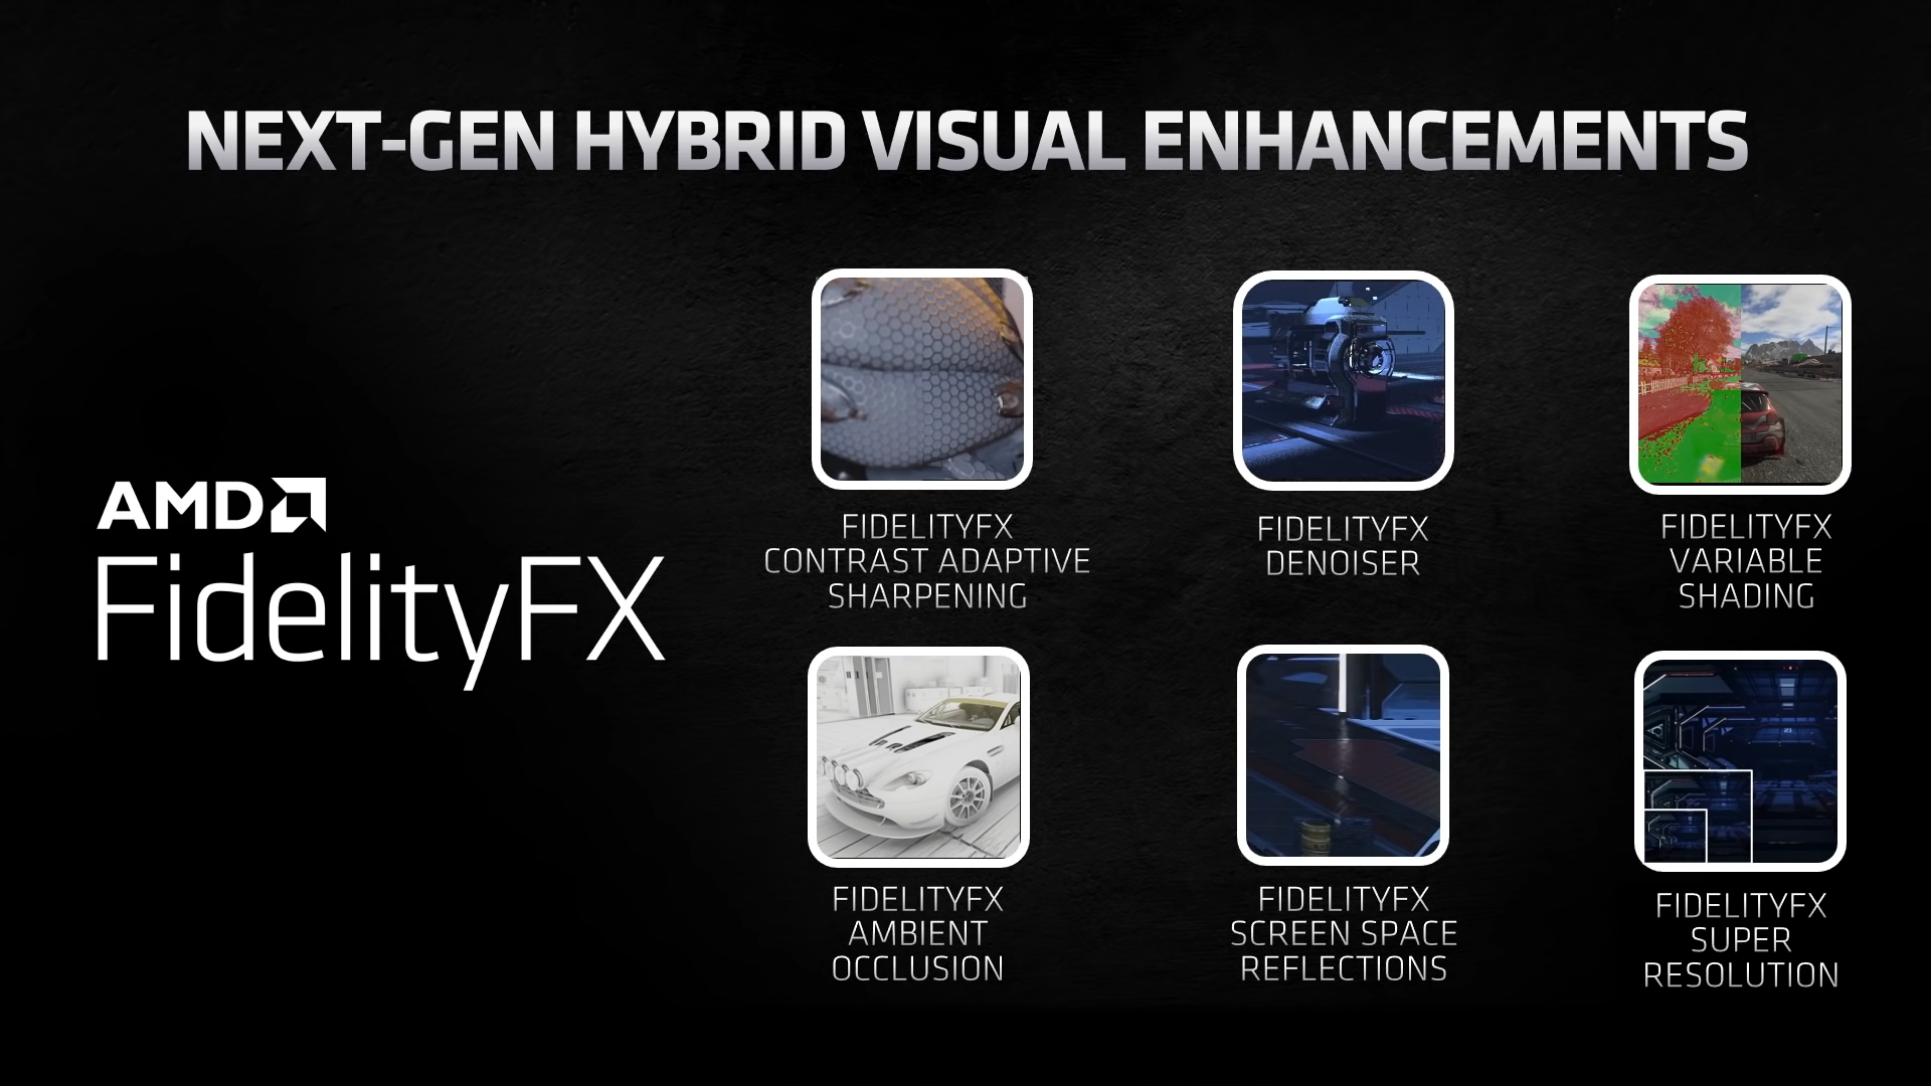 amd’s-latest-patent-could-be-fidelityfx-super-resolution-blueprint